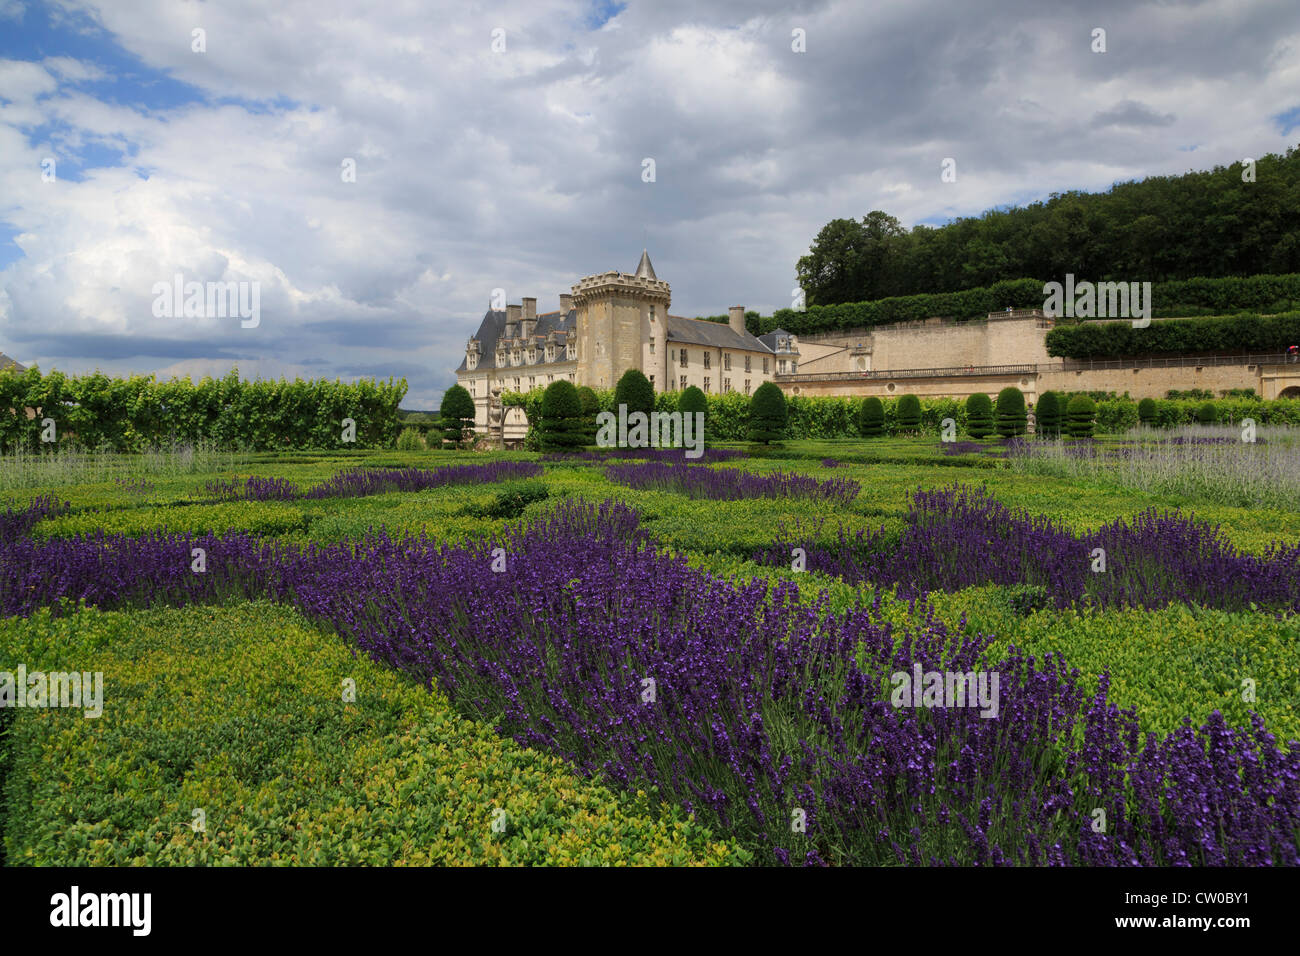 Chateau de Villandry, Loire Valley, France. The late renaissance chateau is most famous for its restored gardens. Stock Photo